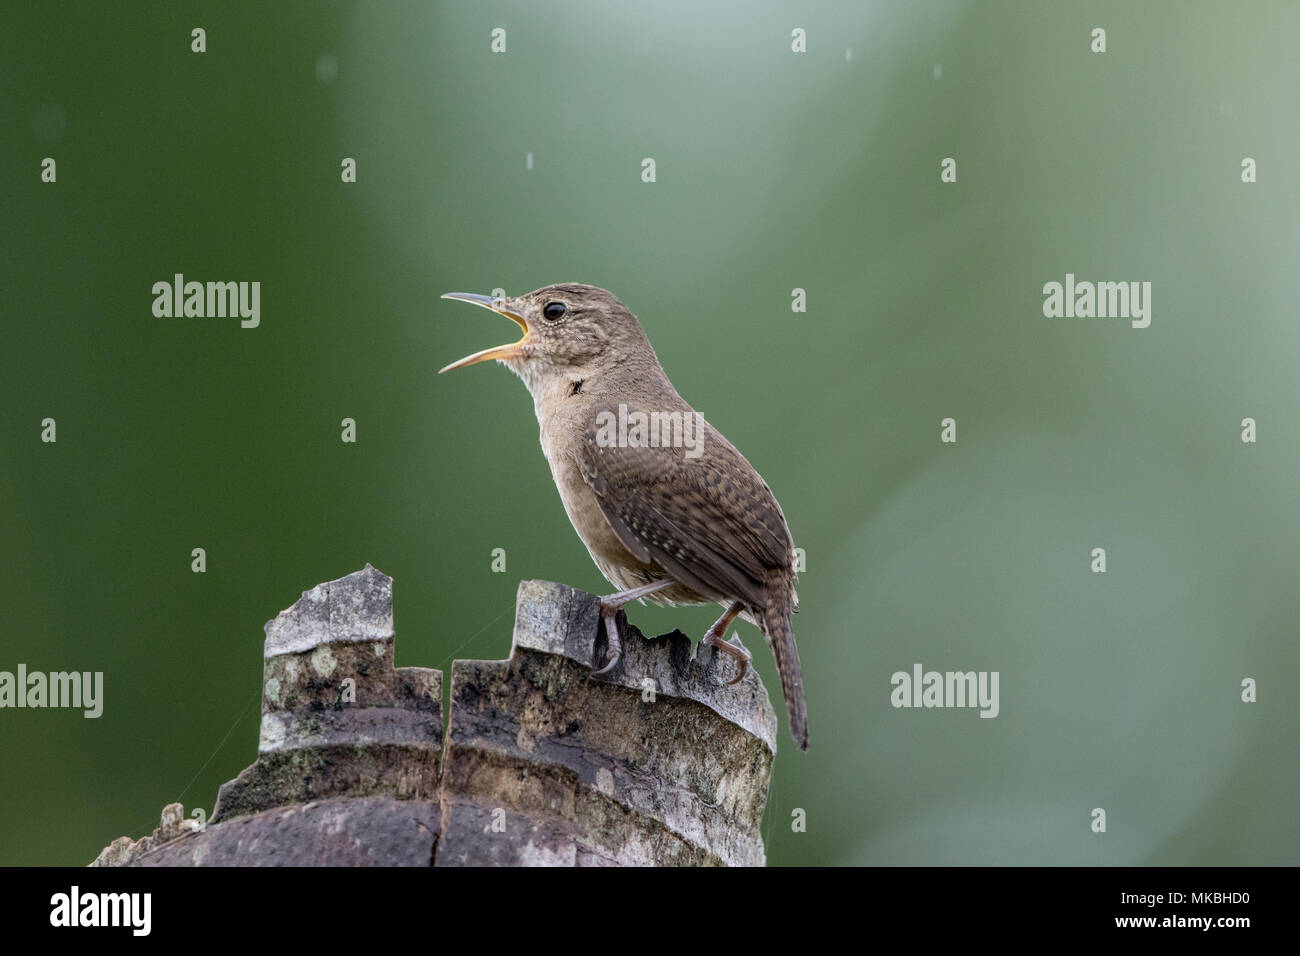 adult house wren Troglodytes aedon singing while perched on dead palm tree, Costa Rica Stock Photo